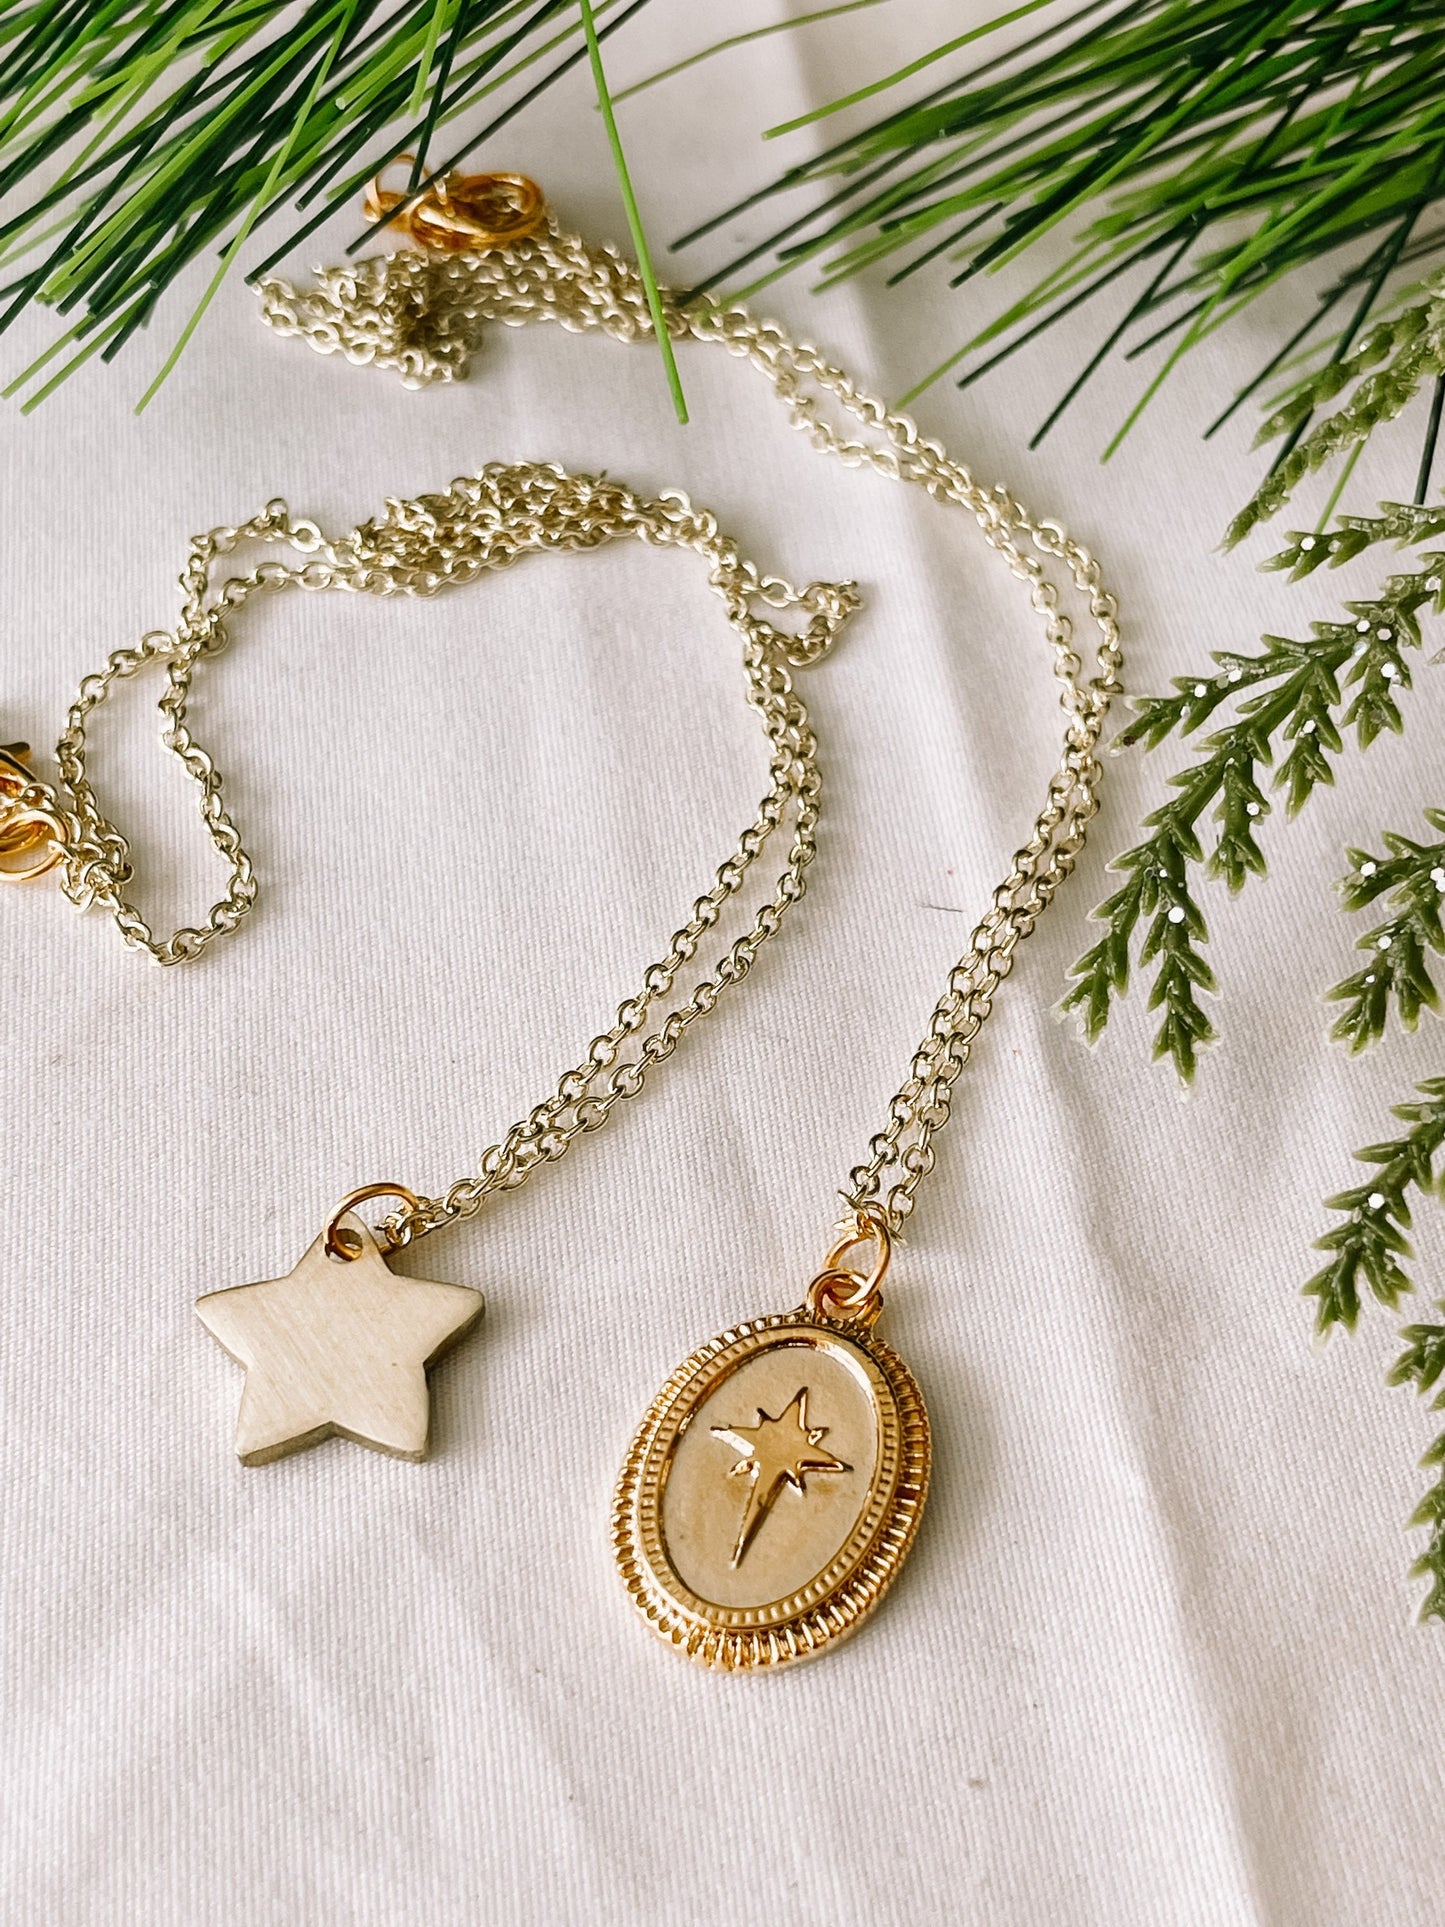 North Star pendant necklace